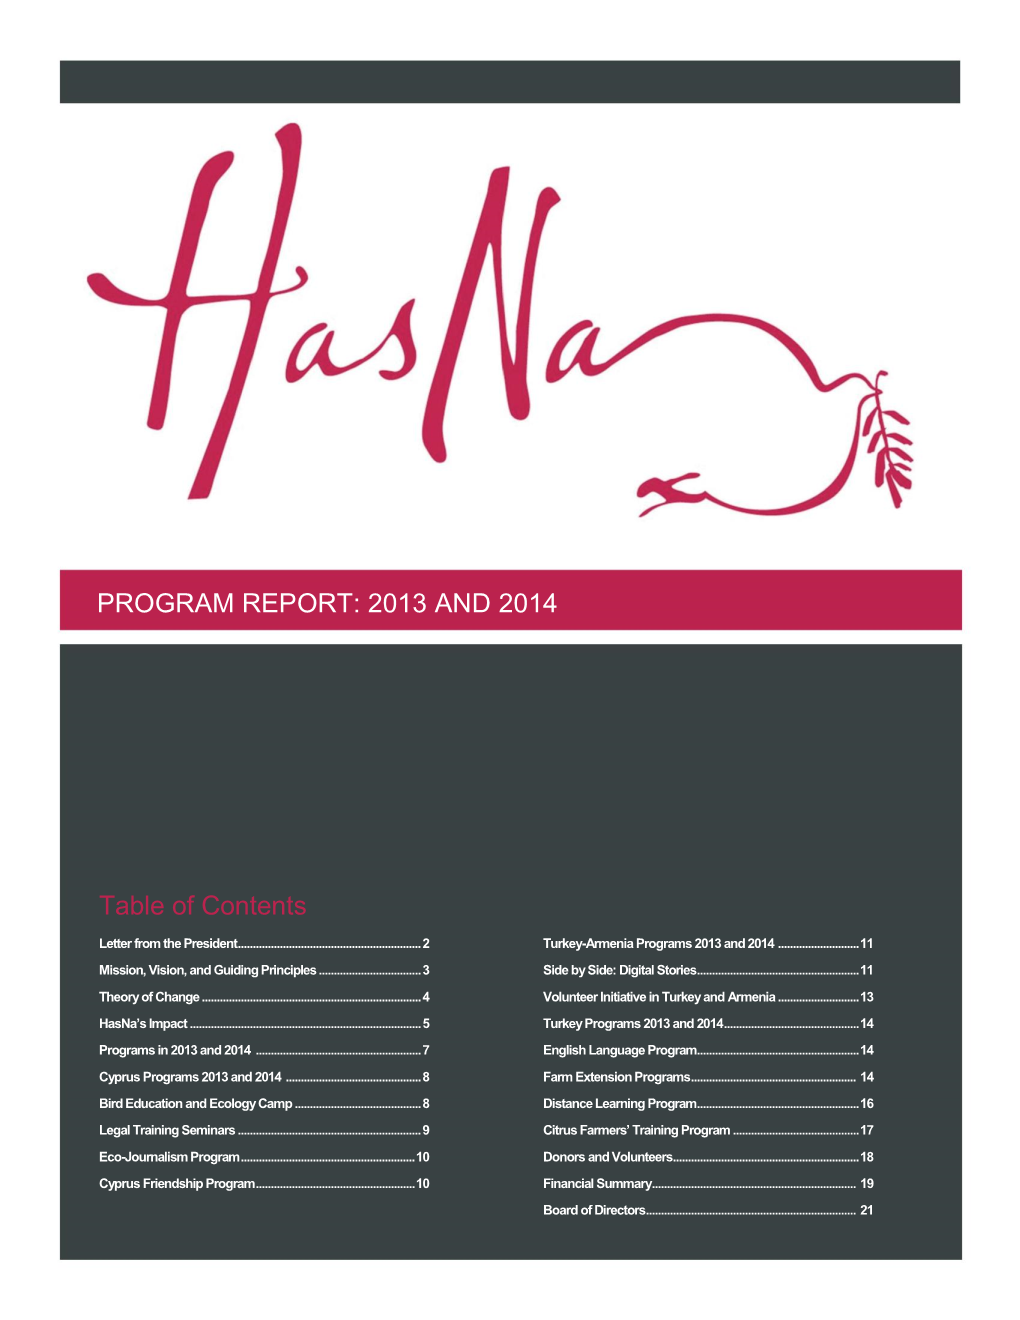 Table of Contents PROGRAM REPORT: 2013 and 2014